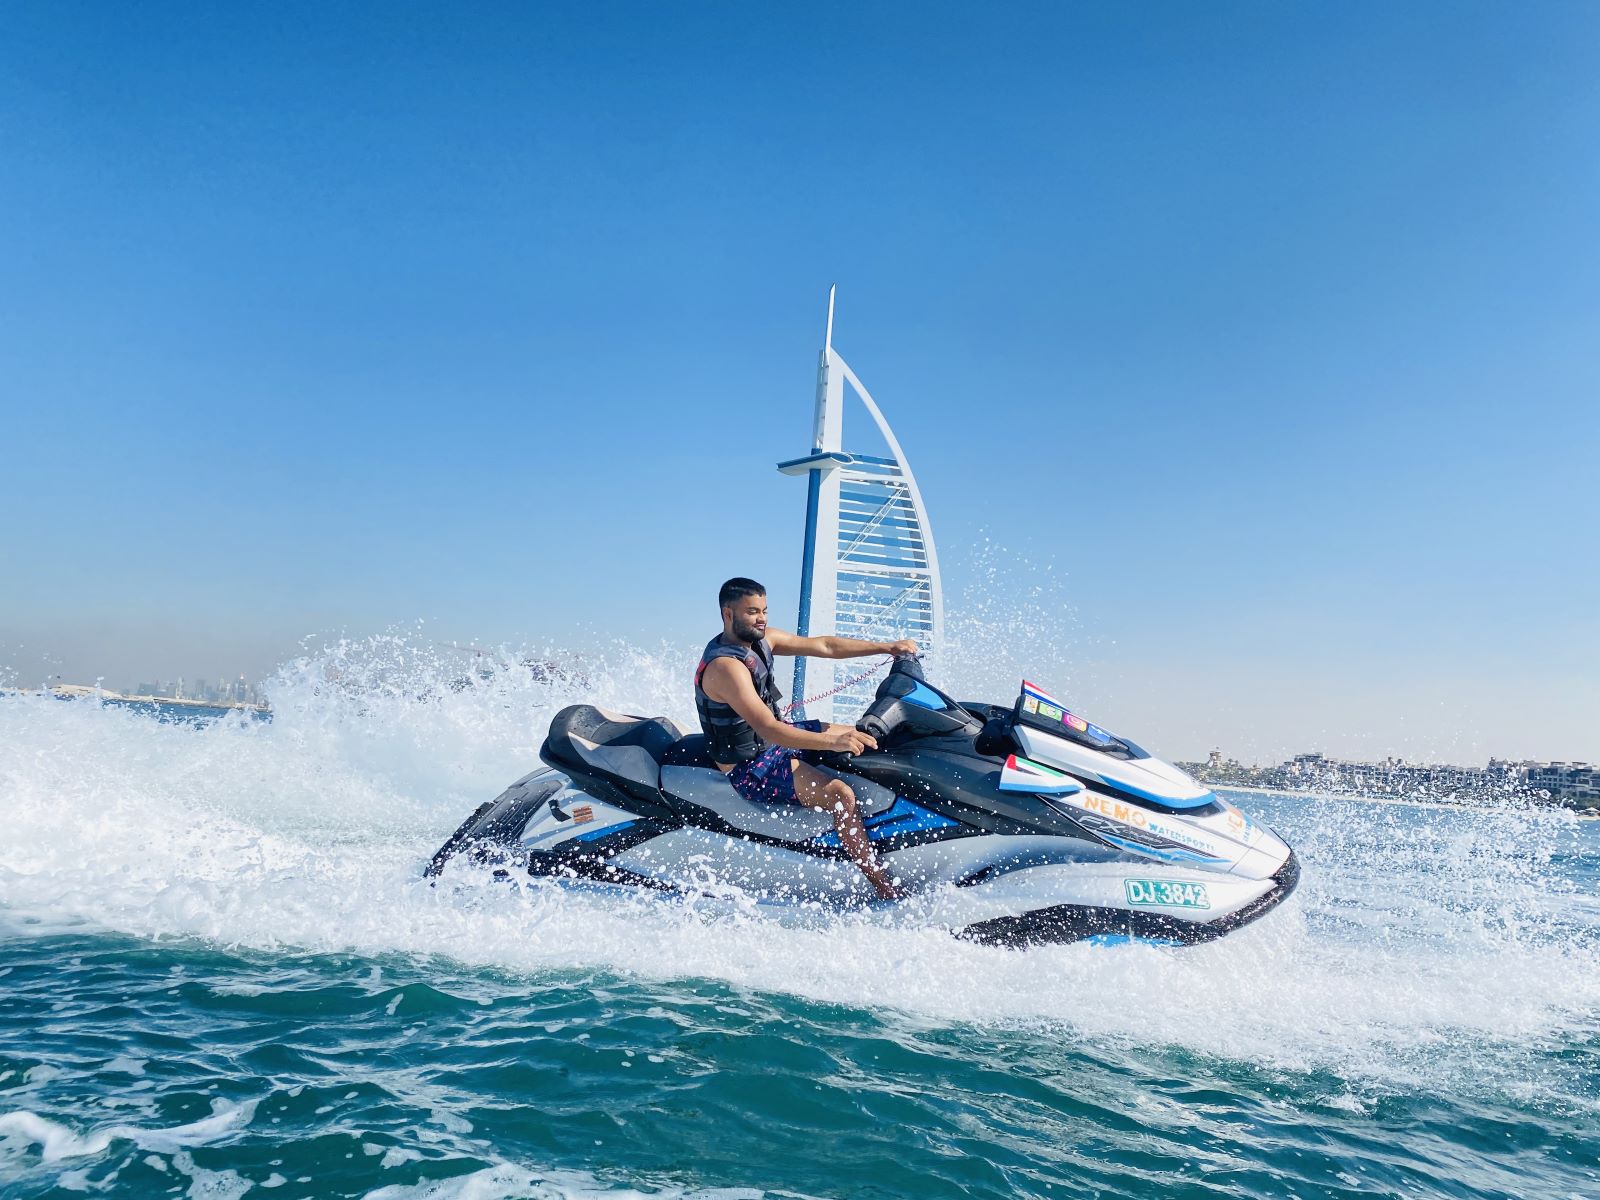 arc-raises-70m-in-funding-to-expand-into-the-watersports-market